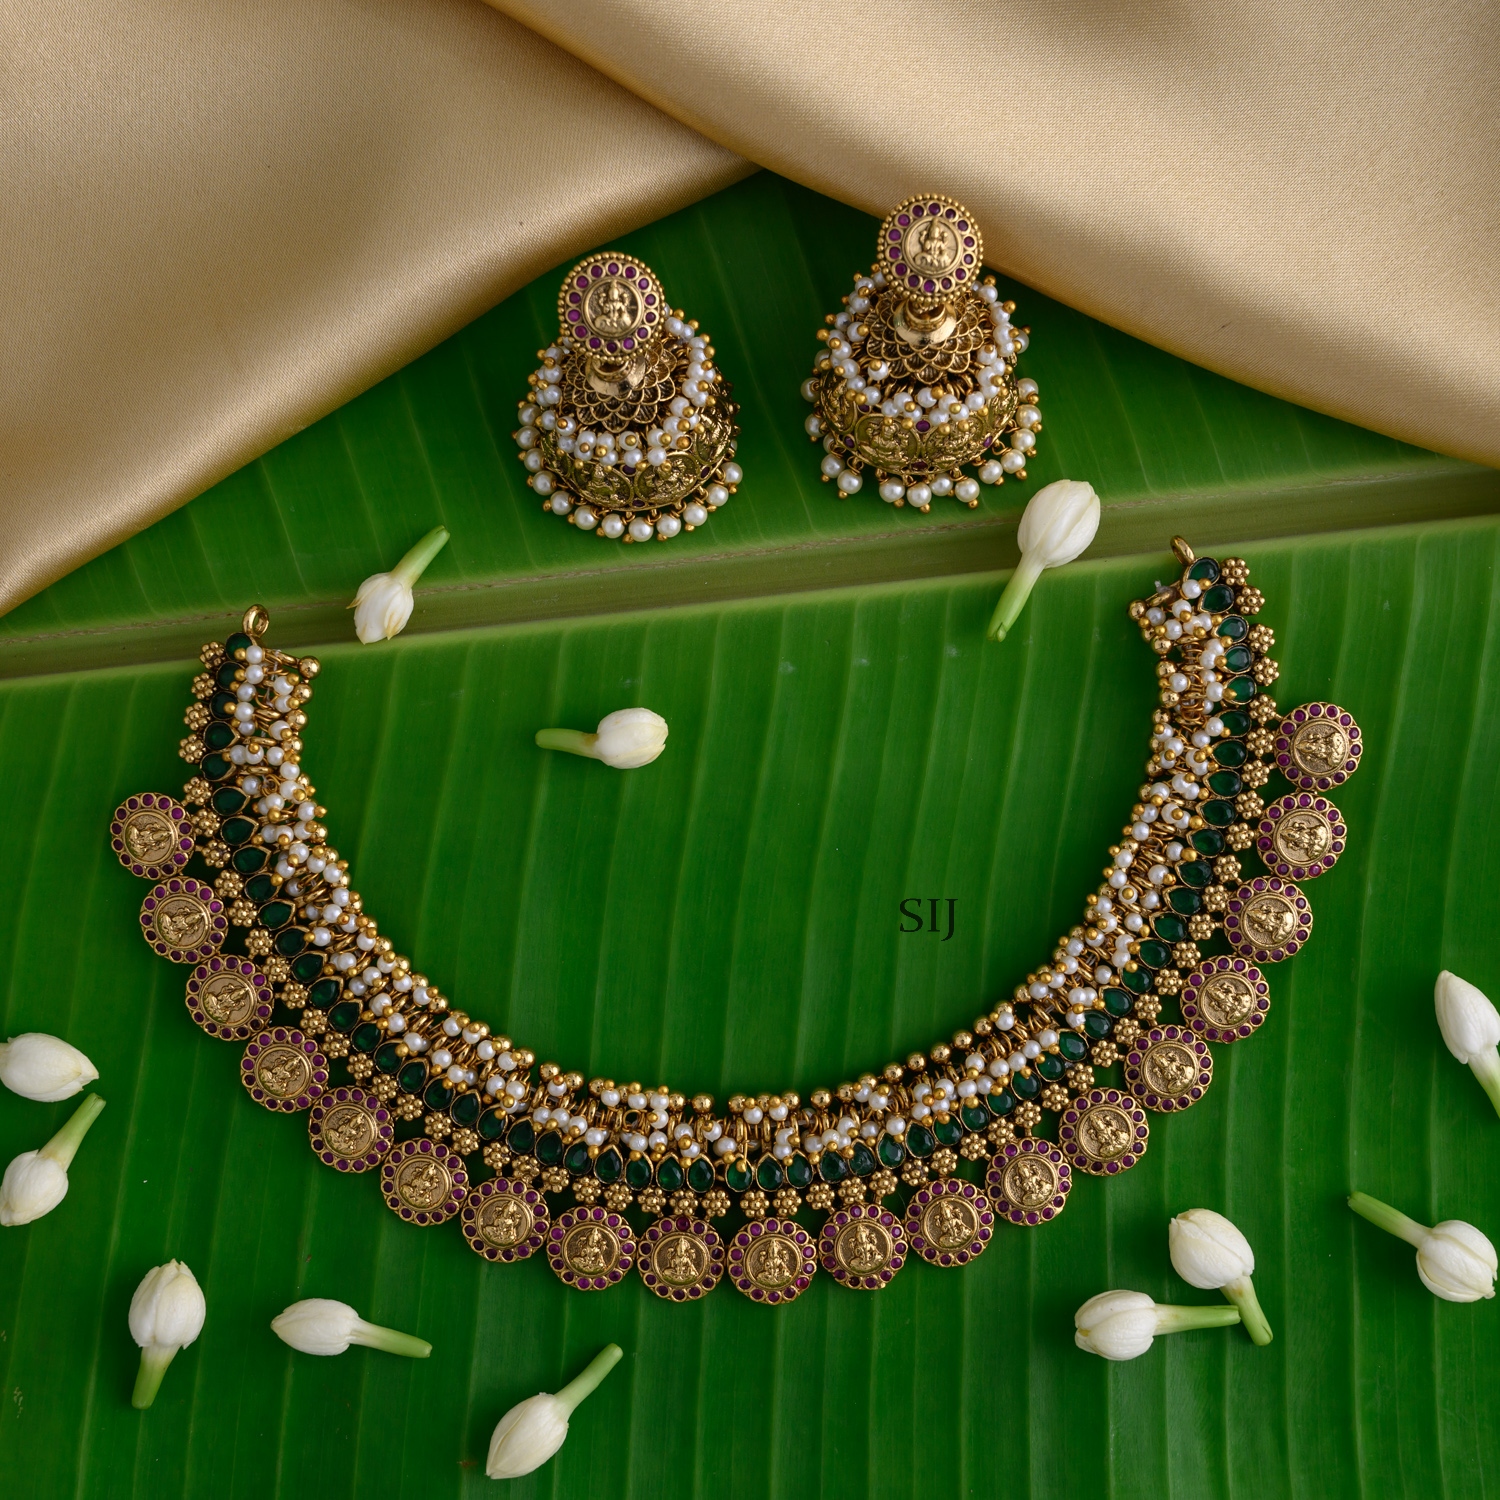 Imitation Lakshmi Design With Ruby And Pearl Beads Necklace Set